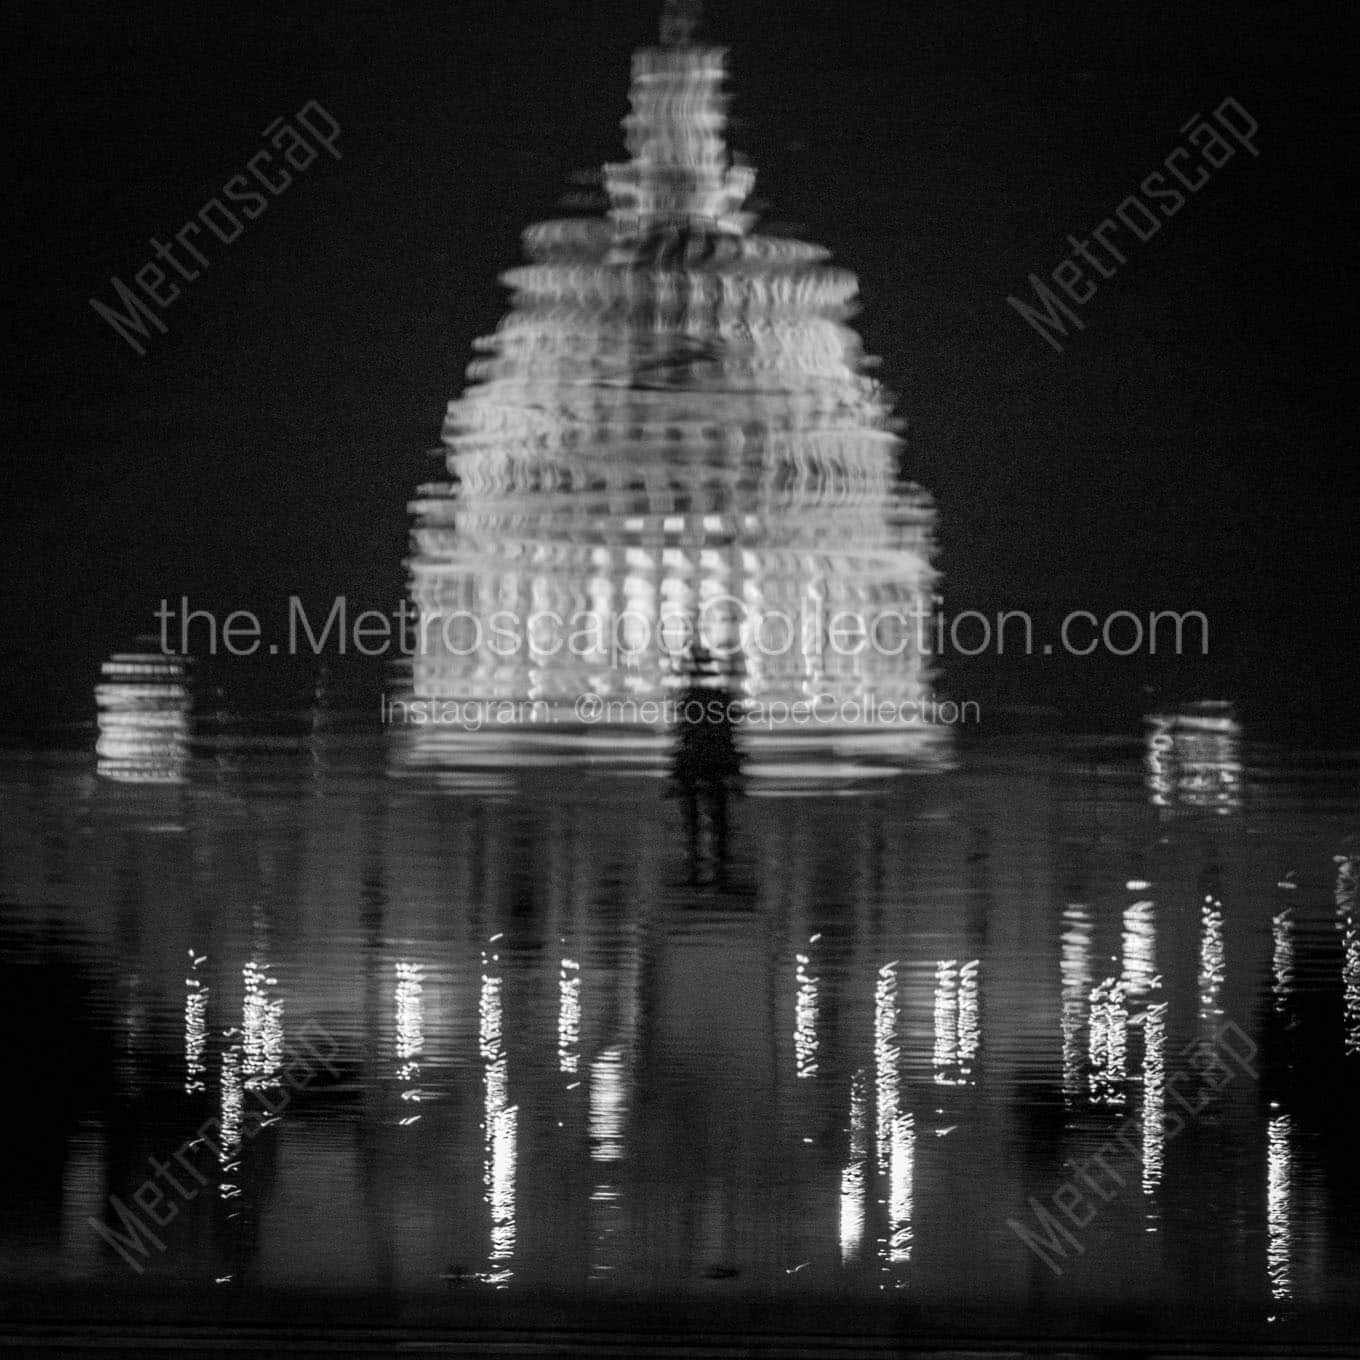 reflection of us capitol dome Black & White Office Art